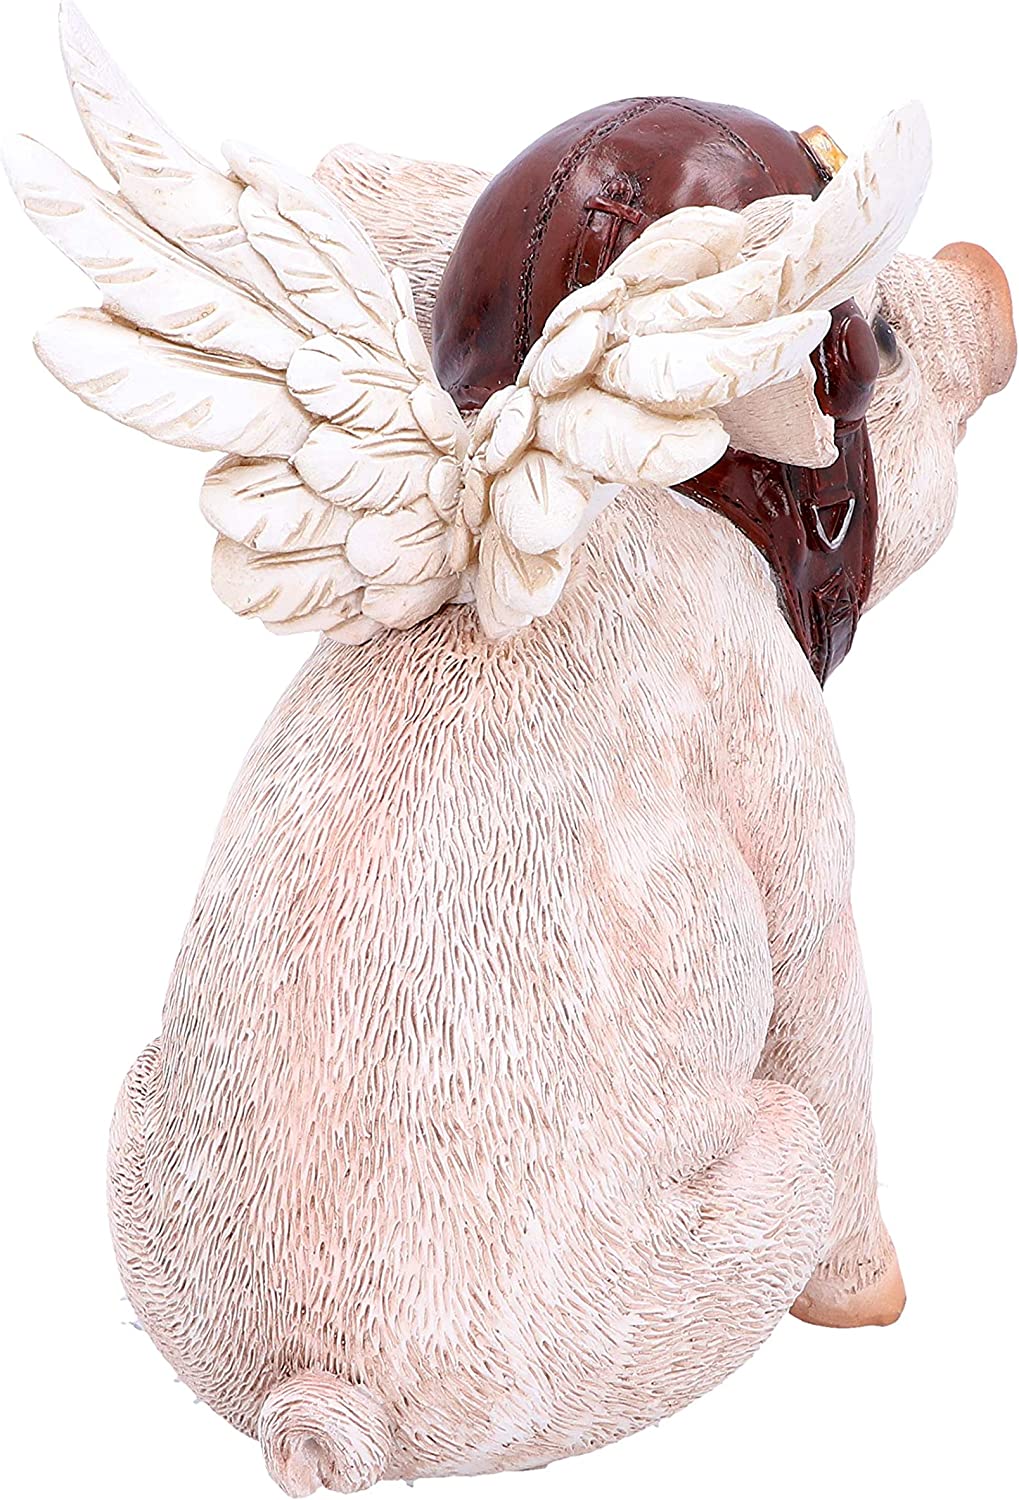 Nemesis Now When Pigs Fly 15.5cm, Resin, Pink, One Size